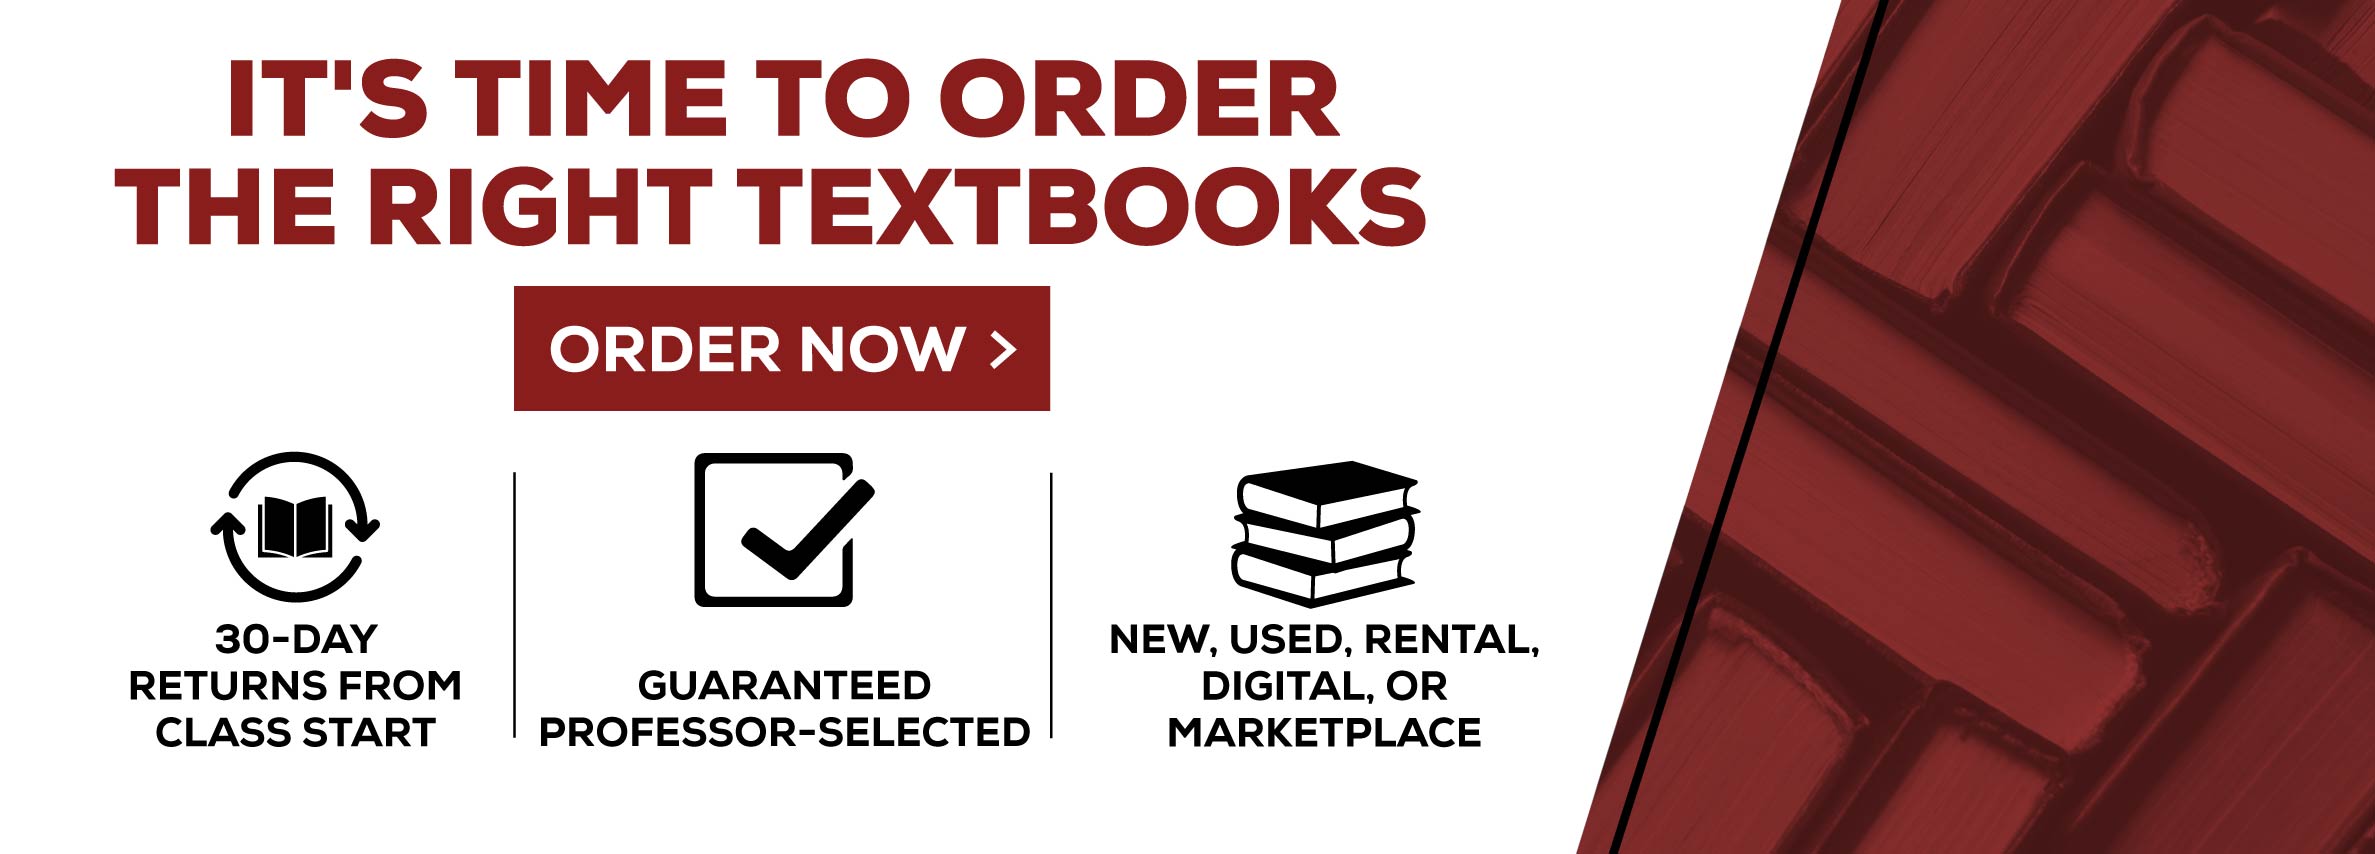 It's Time to Order the Right Textbooks - Order Now - 30-Day Returns From Class Start - Guaranteed Professor-Selected- New, Used, Rental Digital, or Marketplace